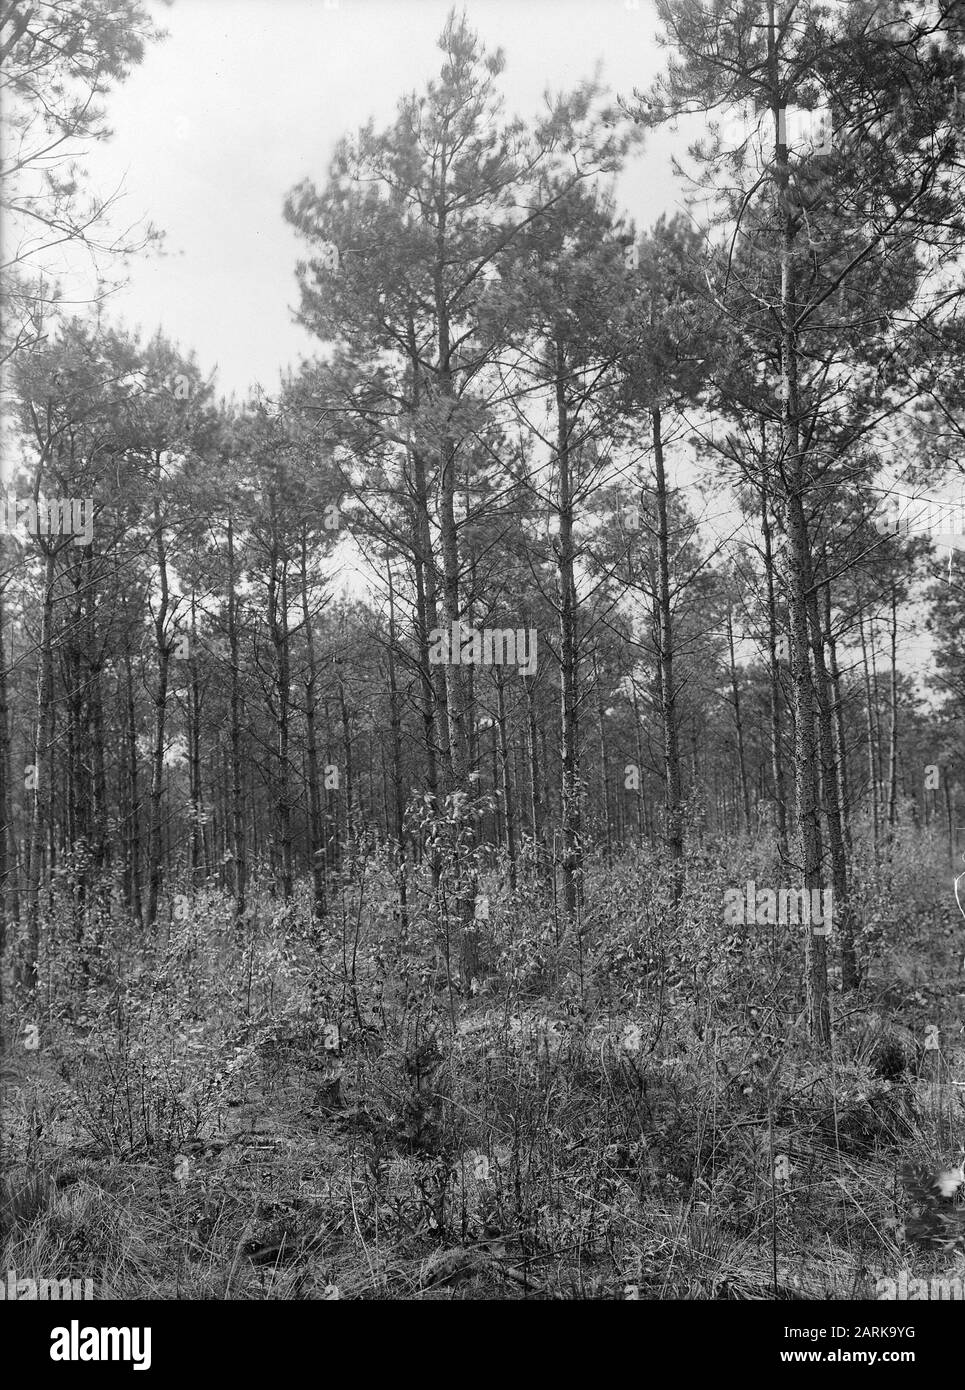 mixed plantings, subsowing, American Oak, Douglas, Groveden, Estate Beestenveld Date: undated Location: Bakel Keywords: mixed plants, Subsowing Personal name: American Oak, Douglas, Groveden, Estate Beestenveld Stock Photo